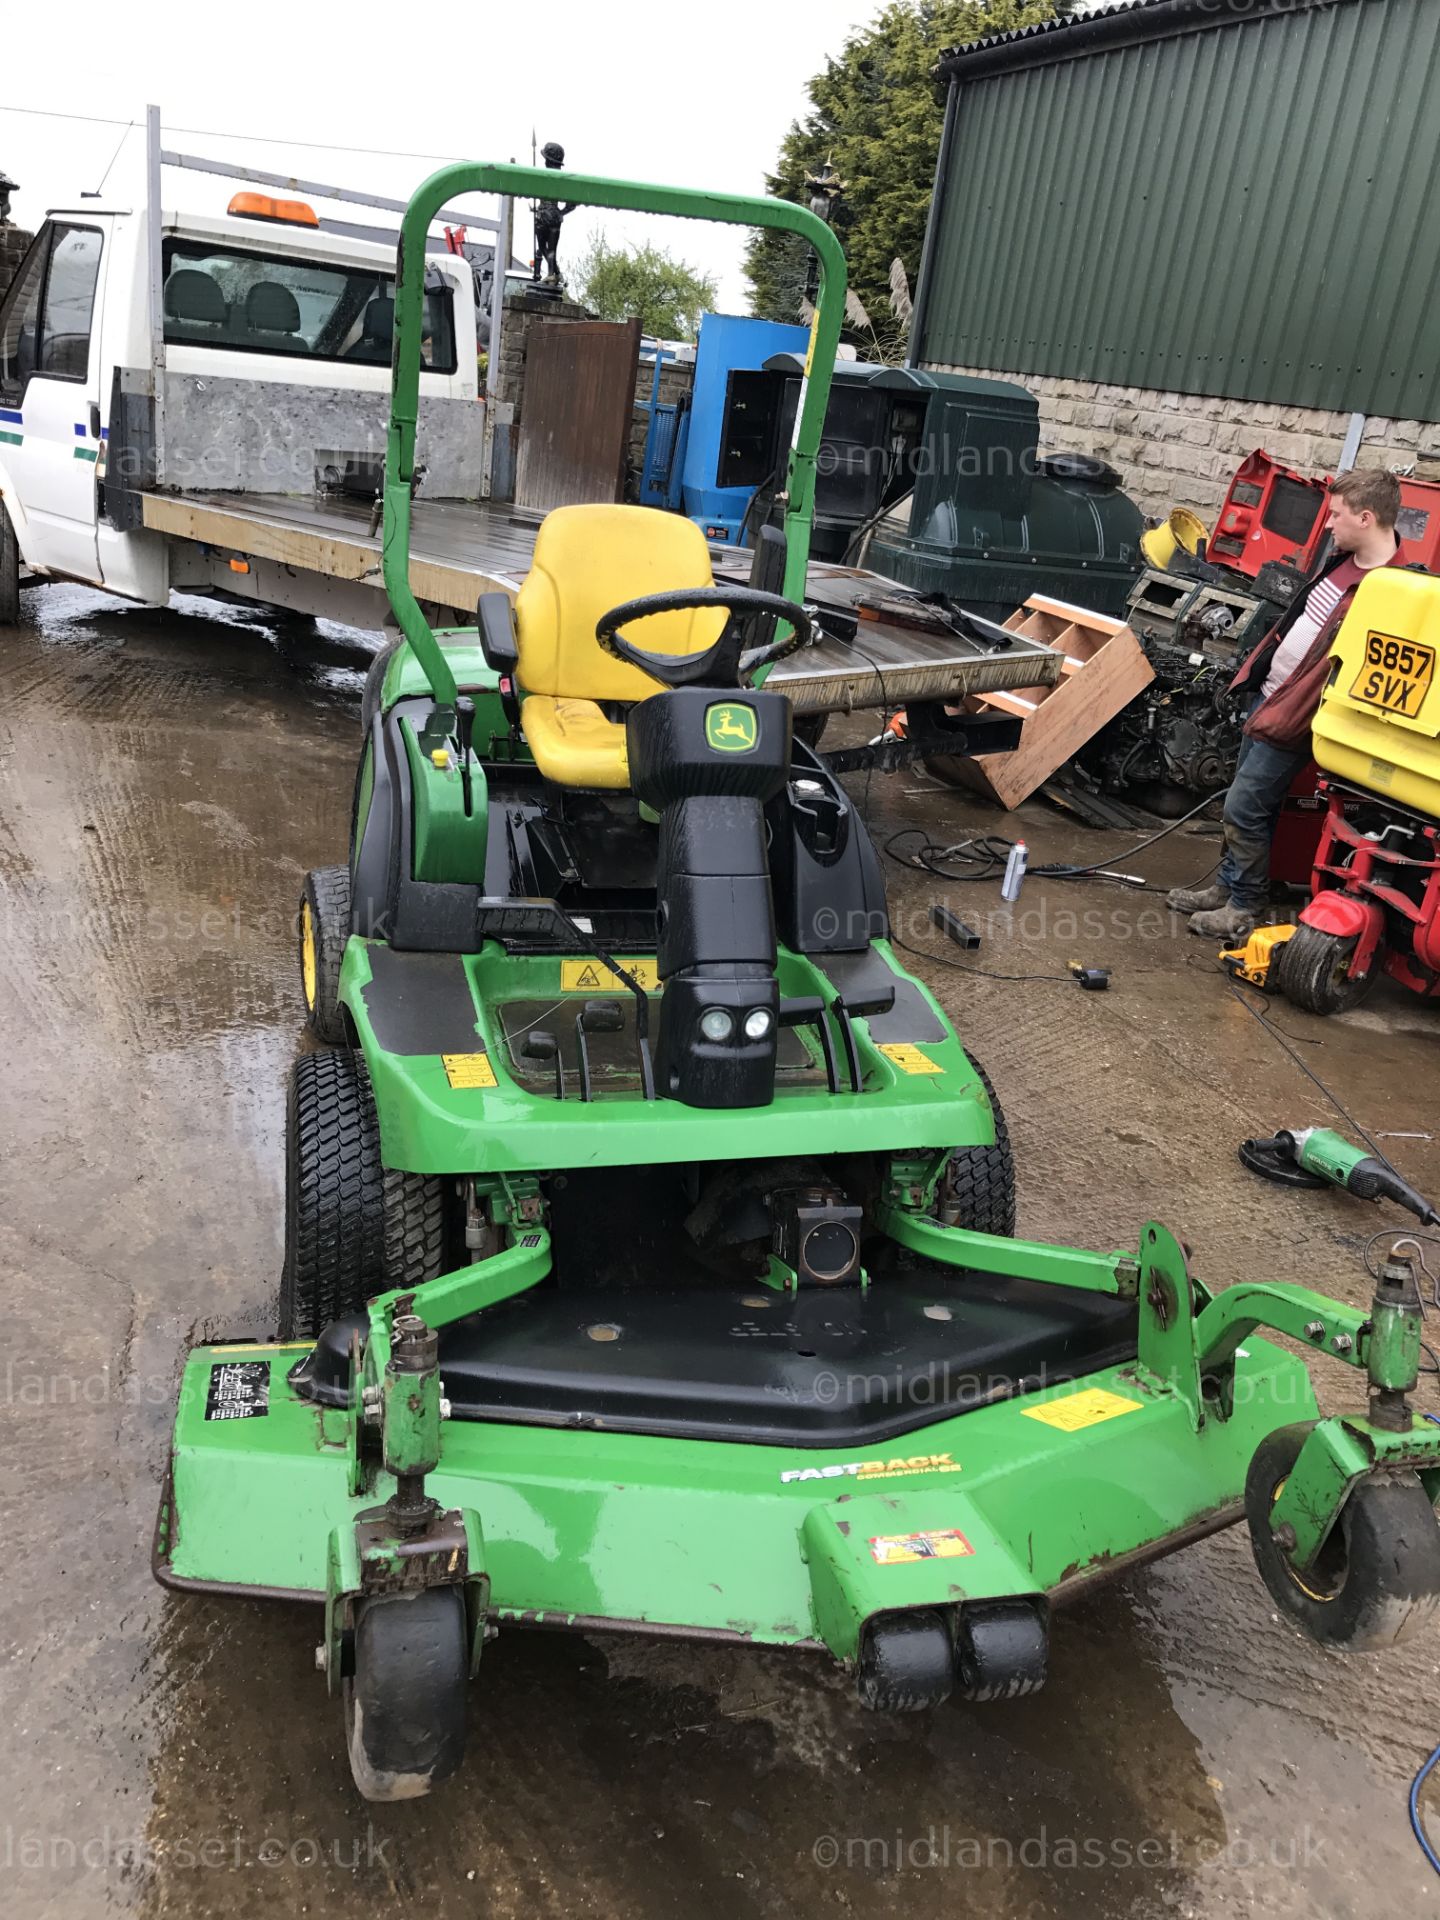 DS - 2008 JOHN DEERE FASTBAC RIDE ON MOWER   YEAR OF MANUFACTURE: 2008 MODEL: 1565 TOTAL PERMISSABLE